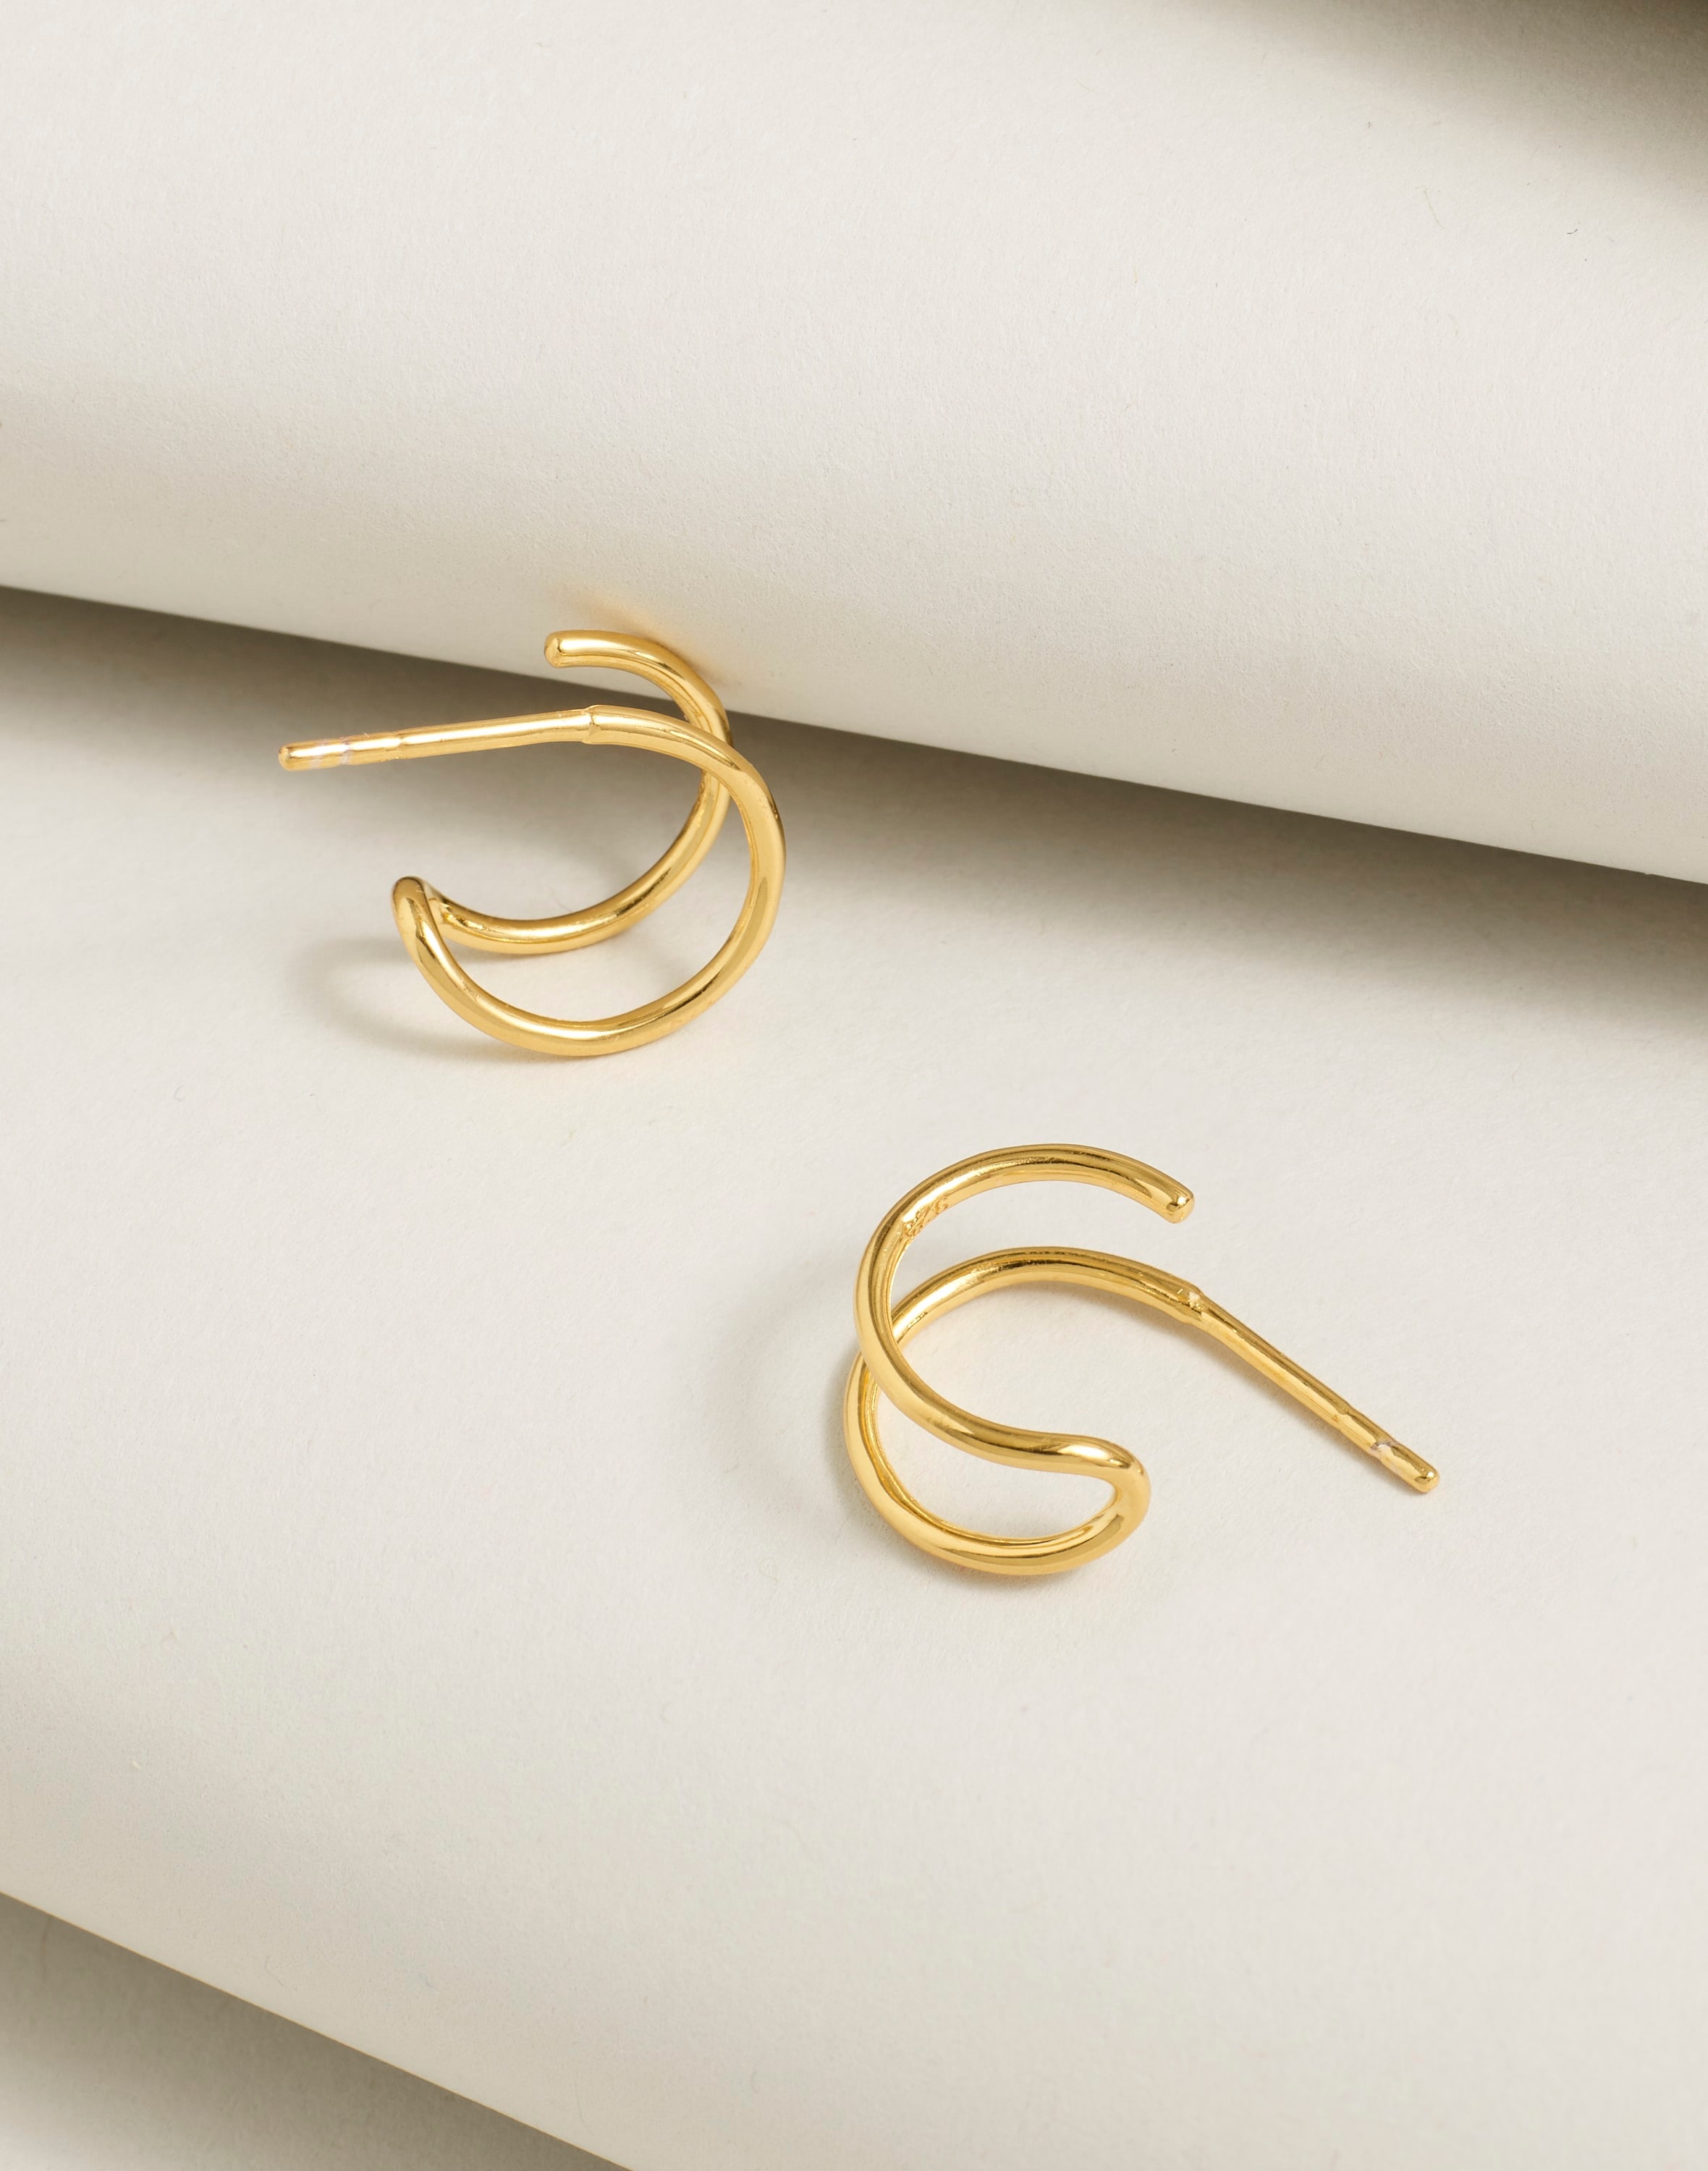 Mw Delicate Collection Demi-fine 14k Plated Double Hoop Earrings In 14k Gold